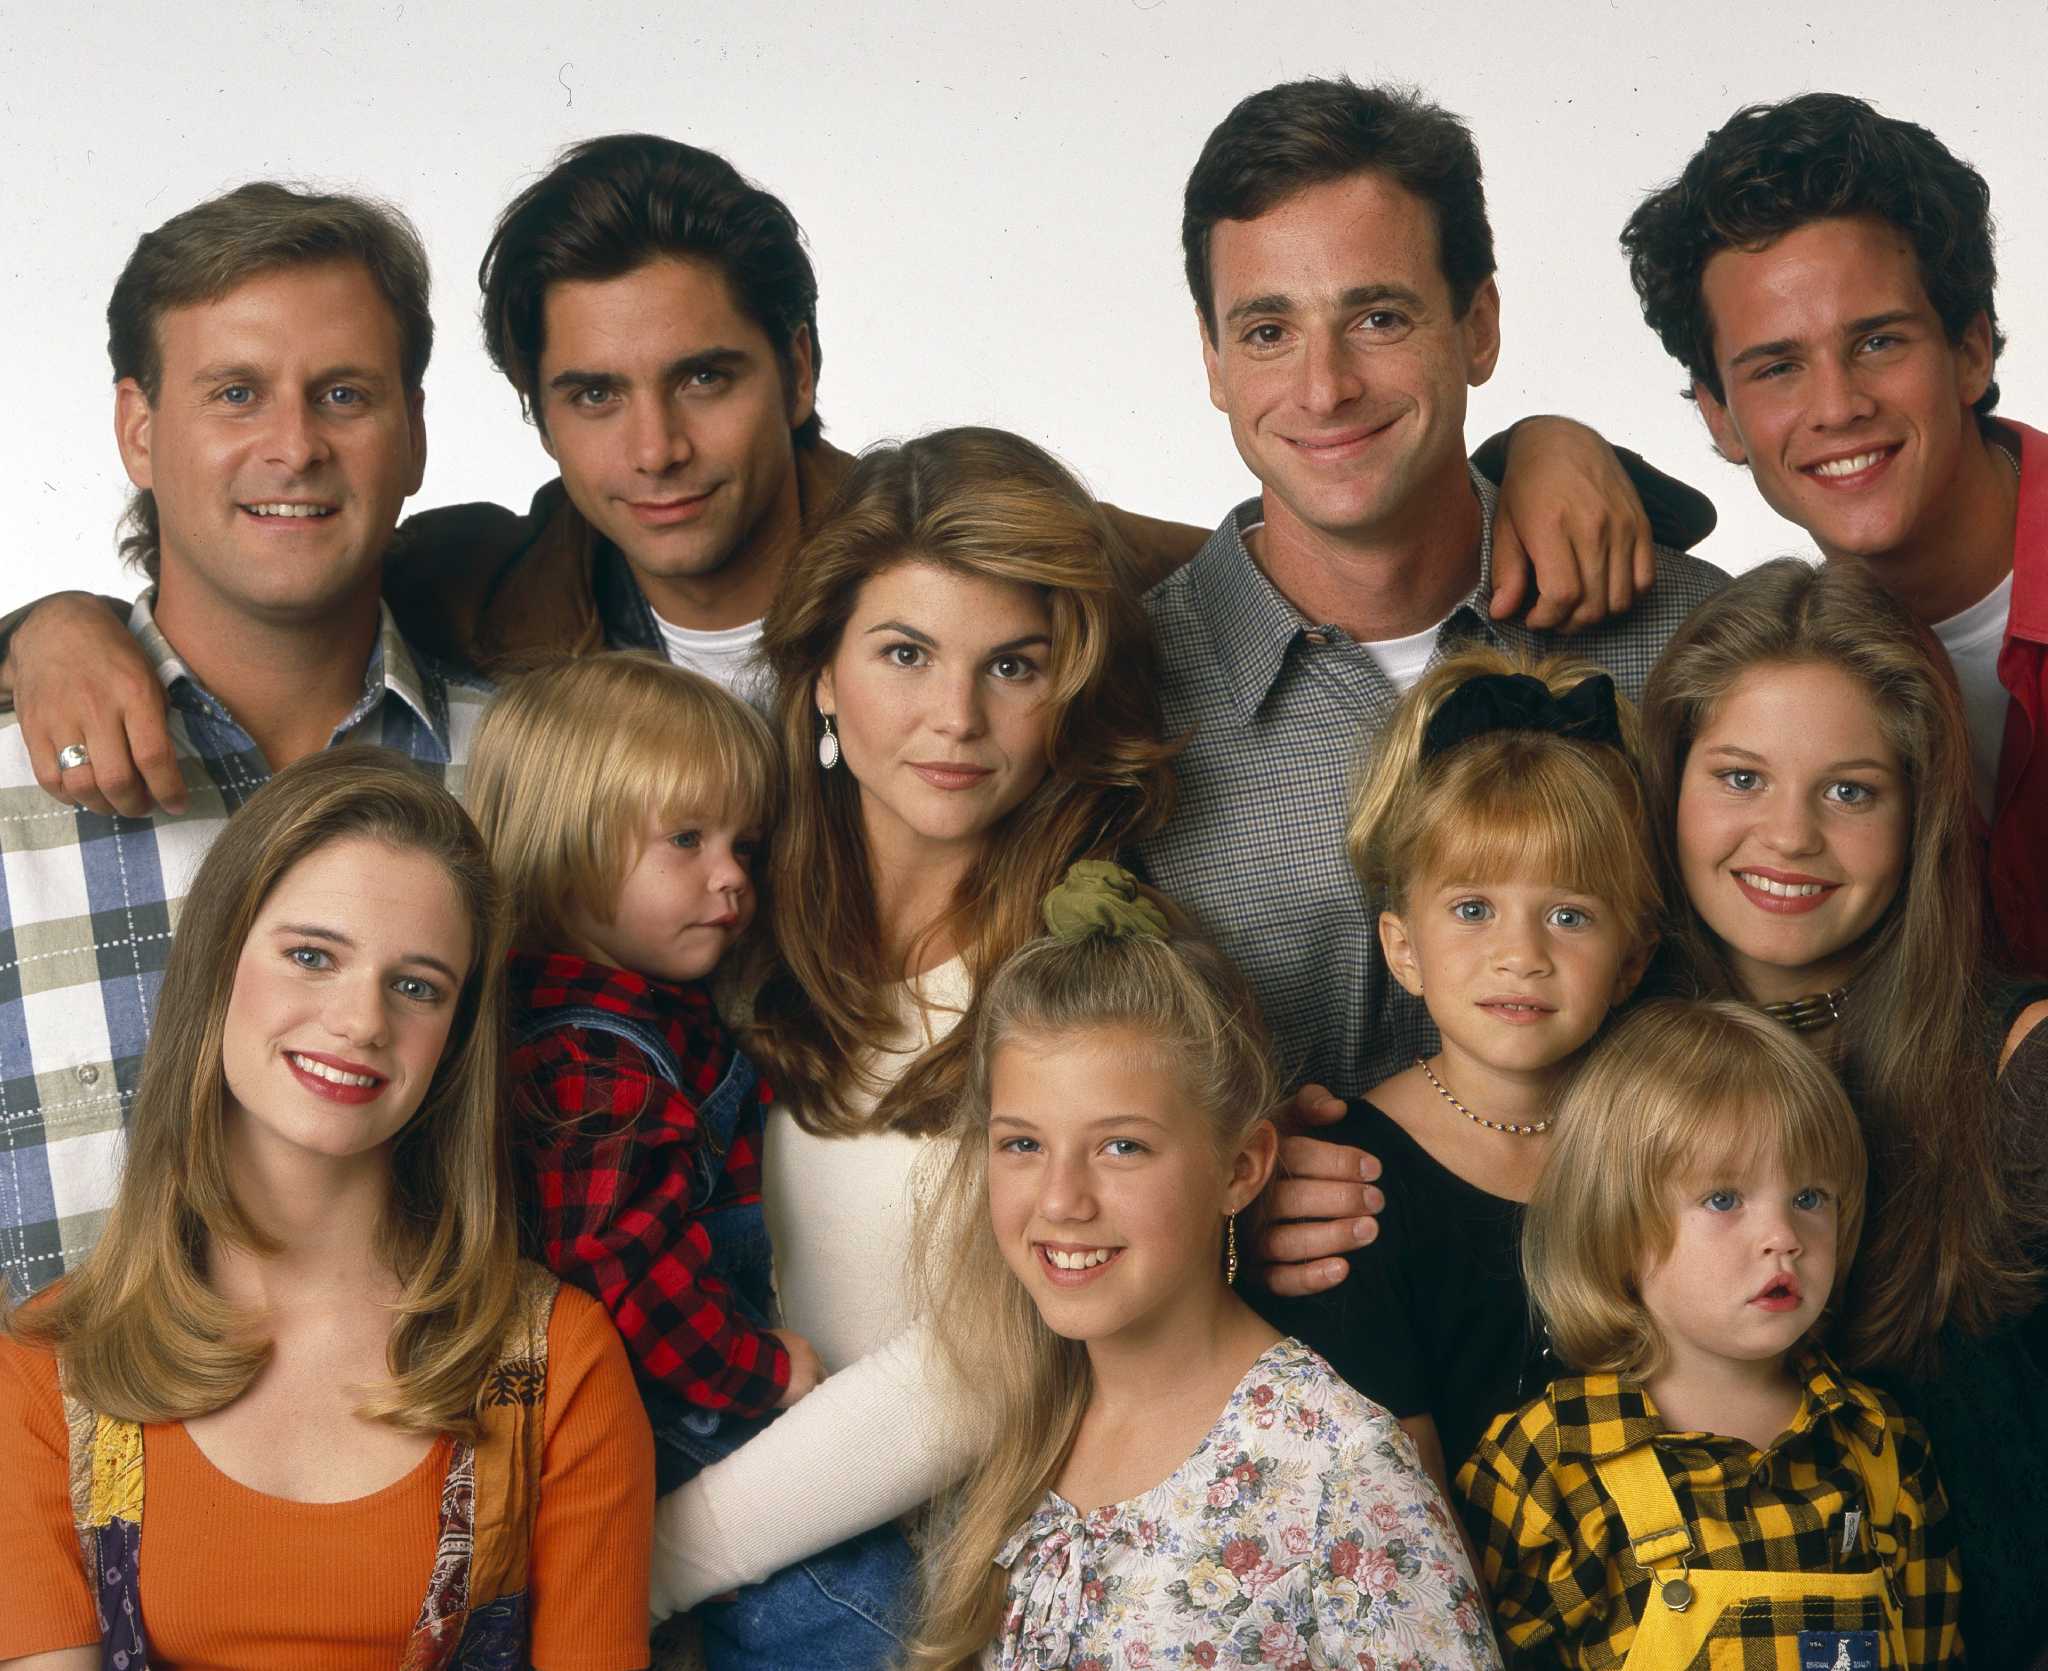 trips or full house